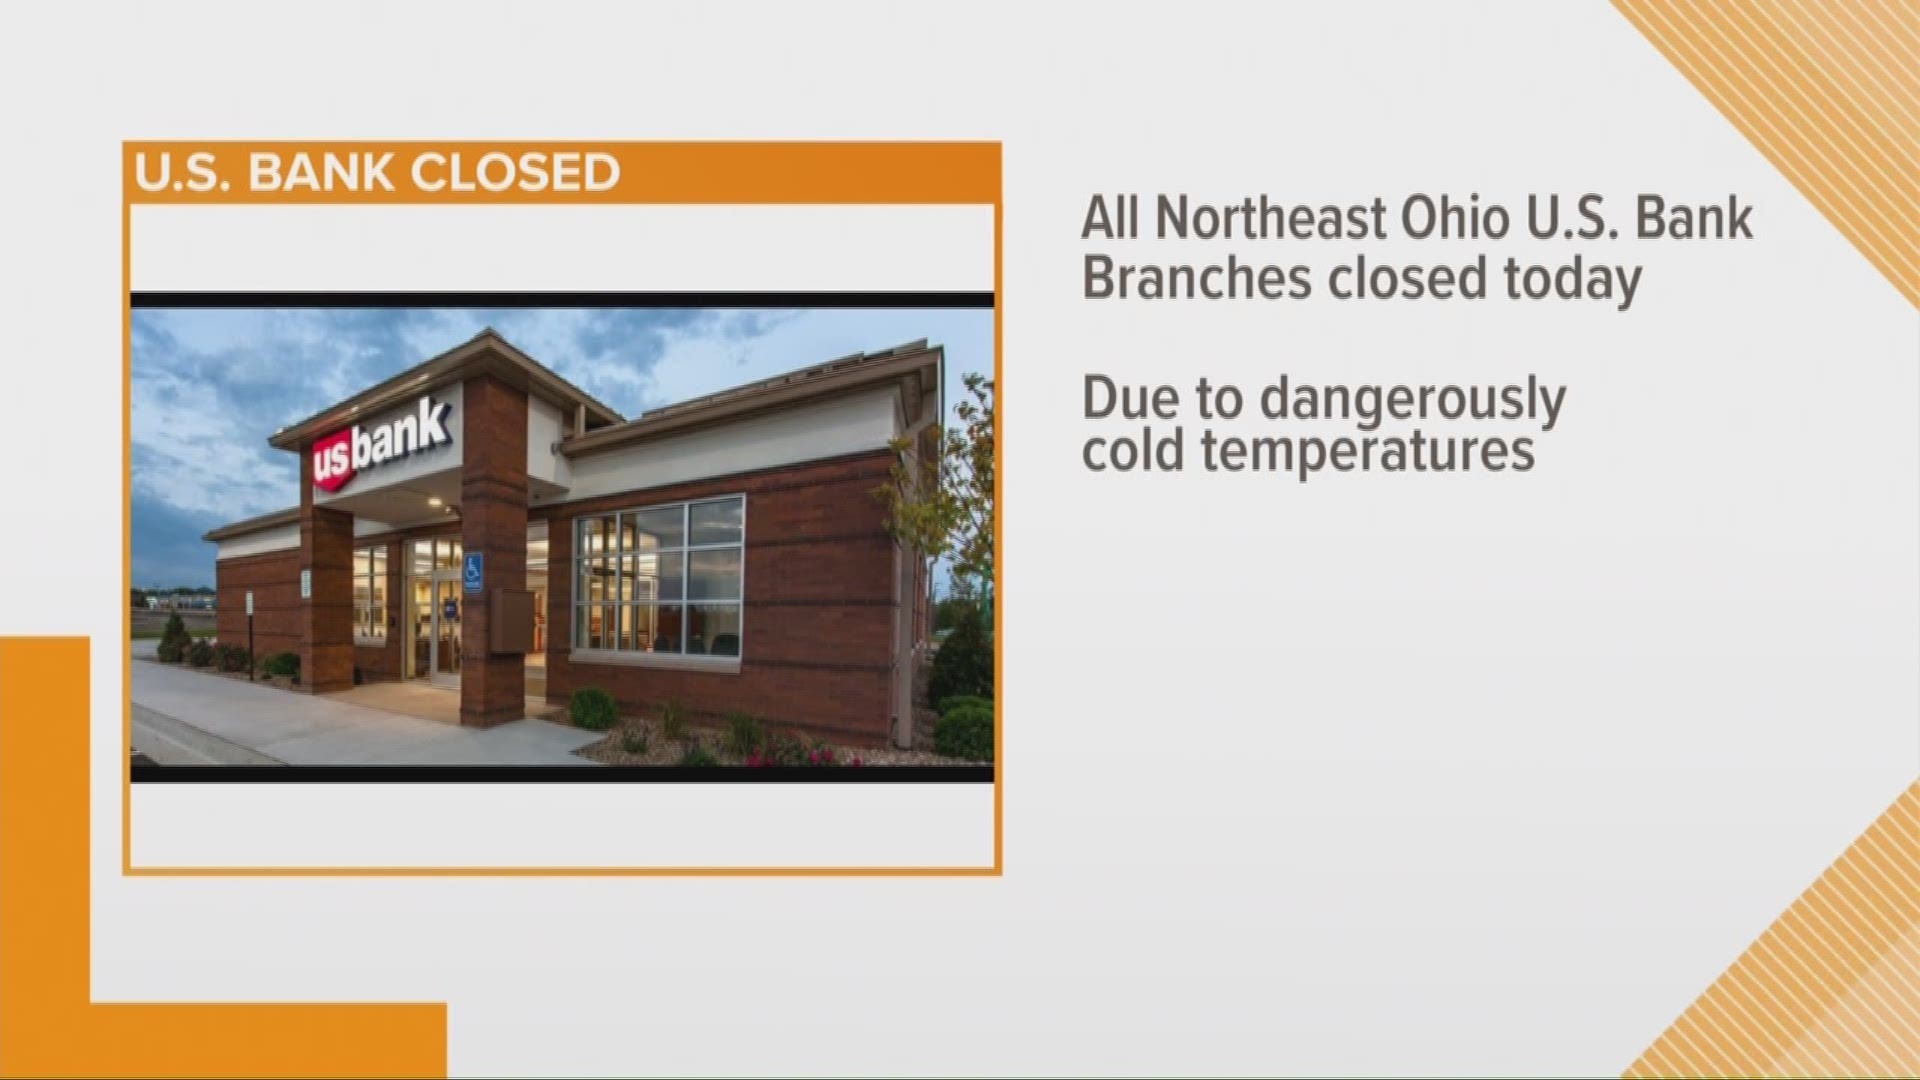 Jan. 30, 2019: Multiple services are closed throughout the region due to the dangerously cold temperatures. Add banks to the list. U.S. Bank tells WKYC they are closing all Northeast Ohio branches Wednesday ‘due to the inclement weather.’ This includes Cleveland, Akron and all surrounding suburbs.